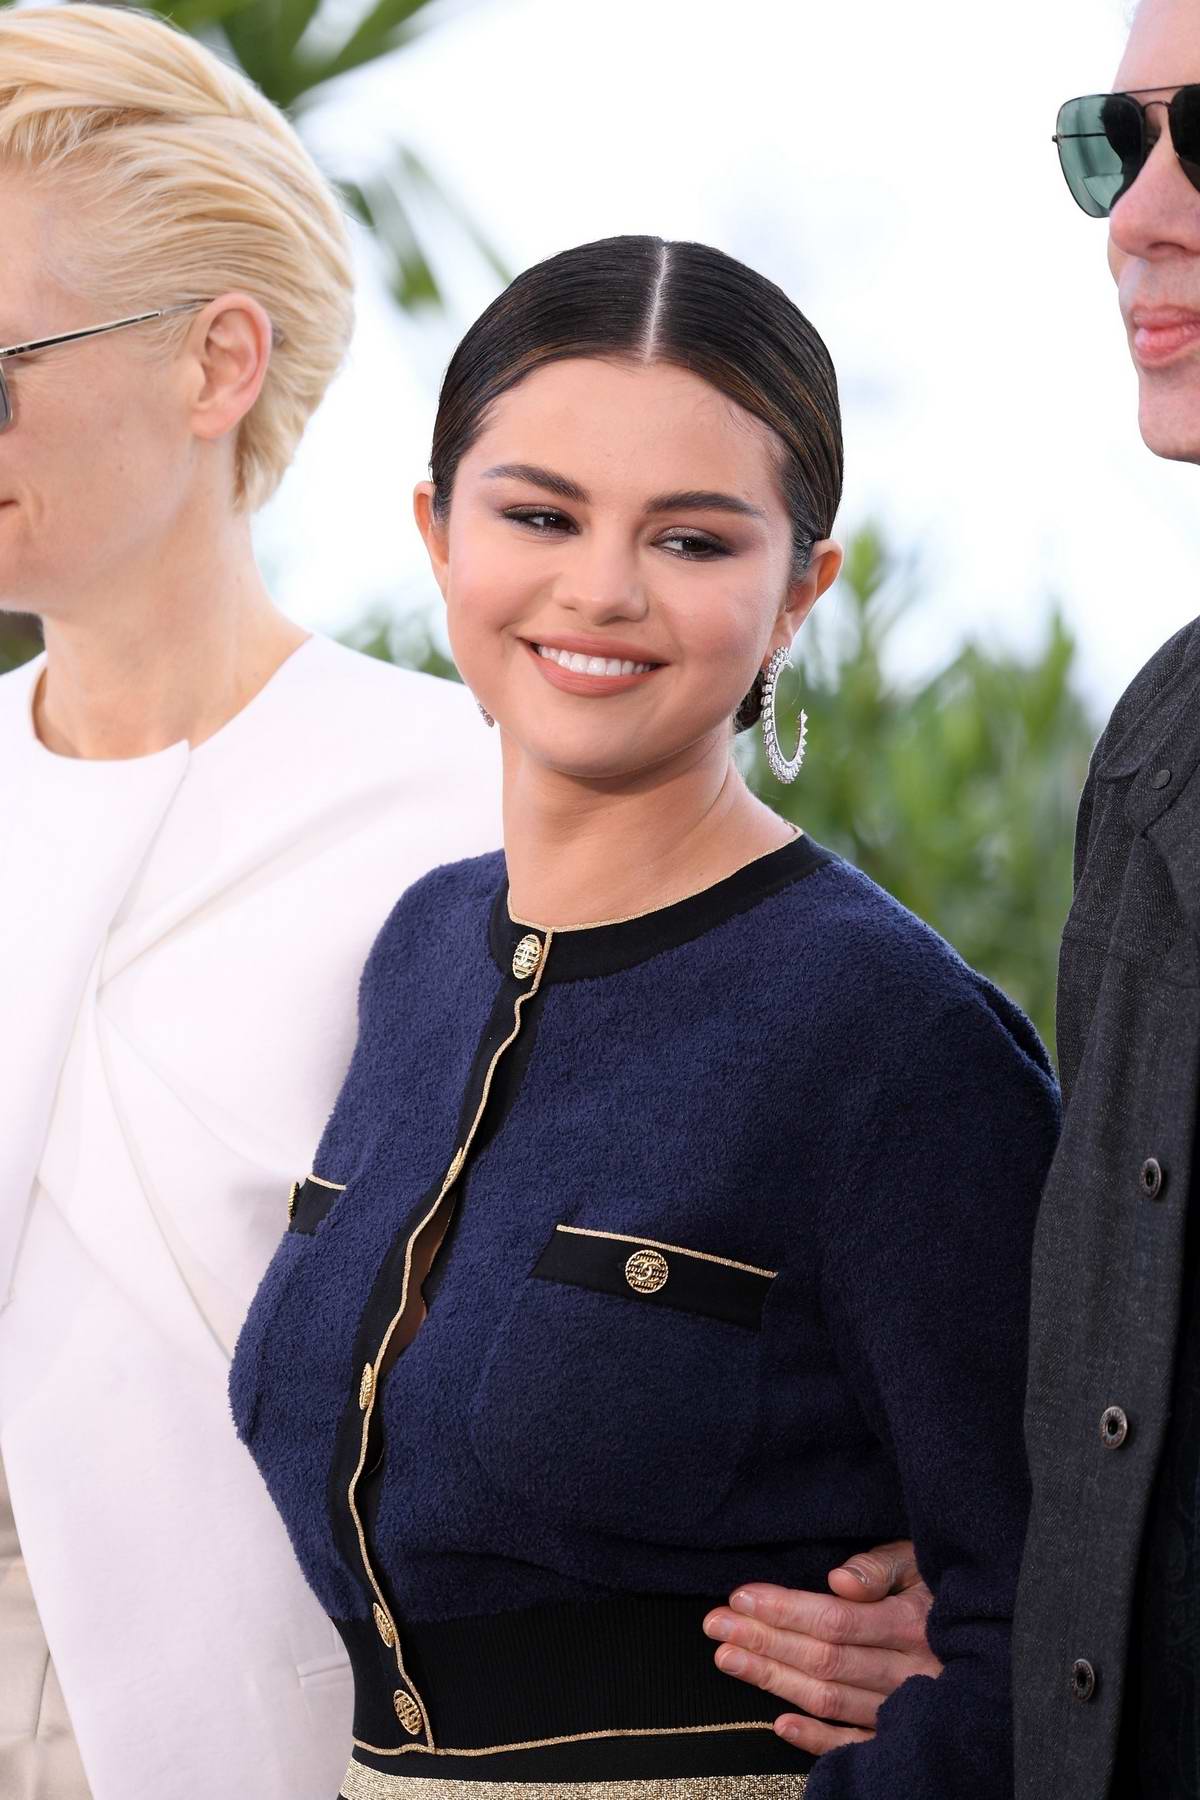 Selena Gomez Attends The Dead Don T Die Photocall During The 72nd Annual Cannes Film Festival